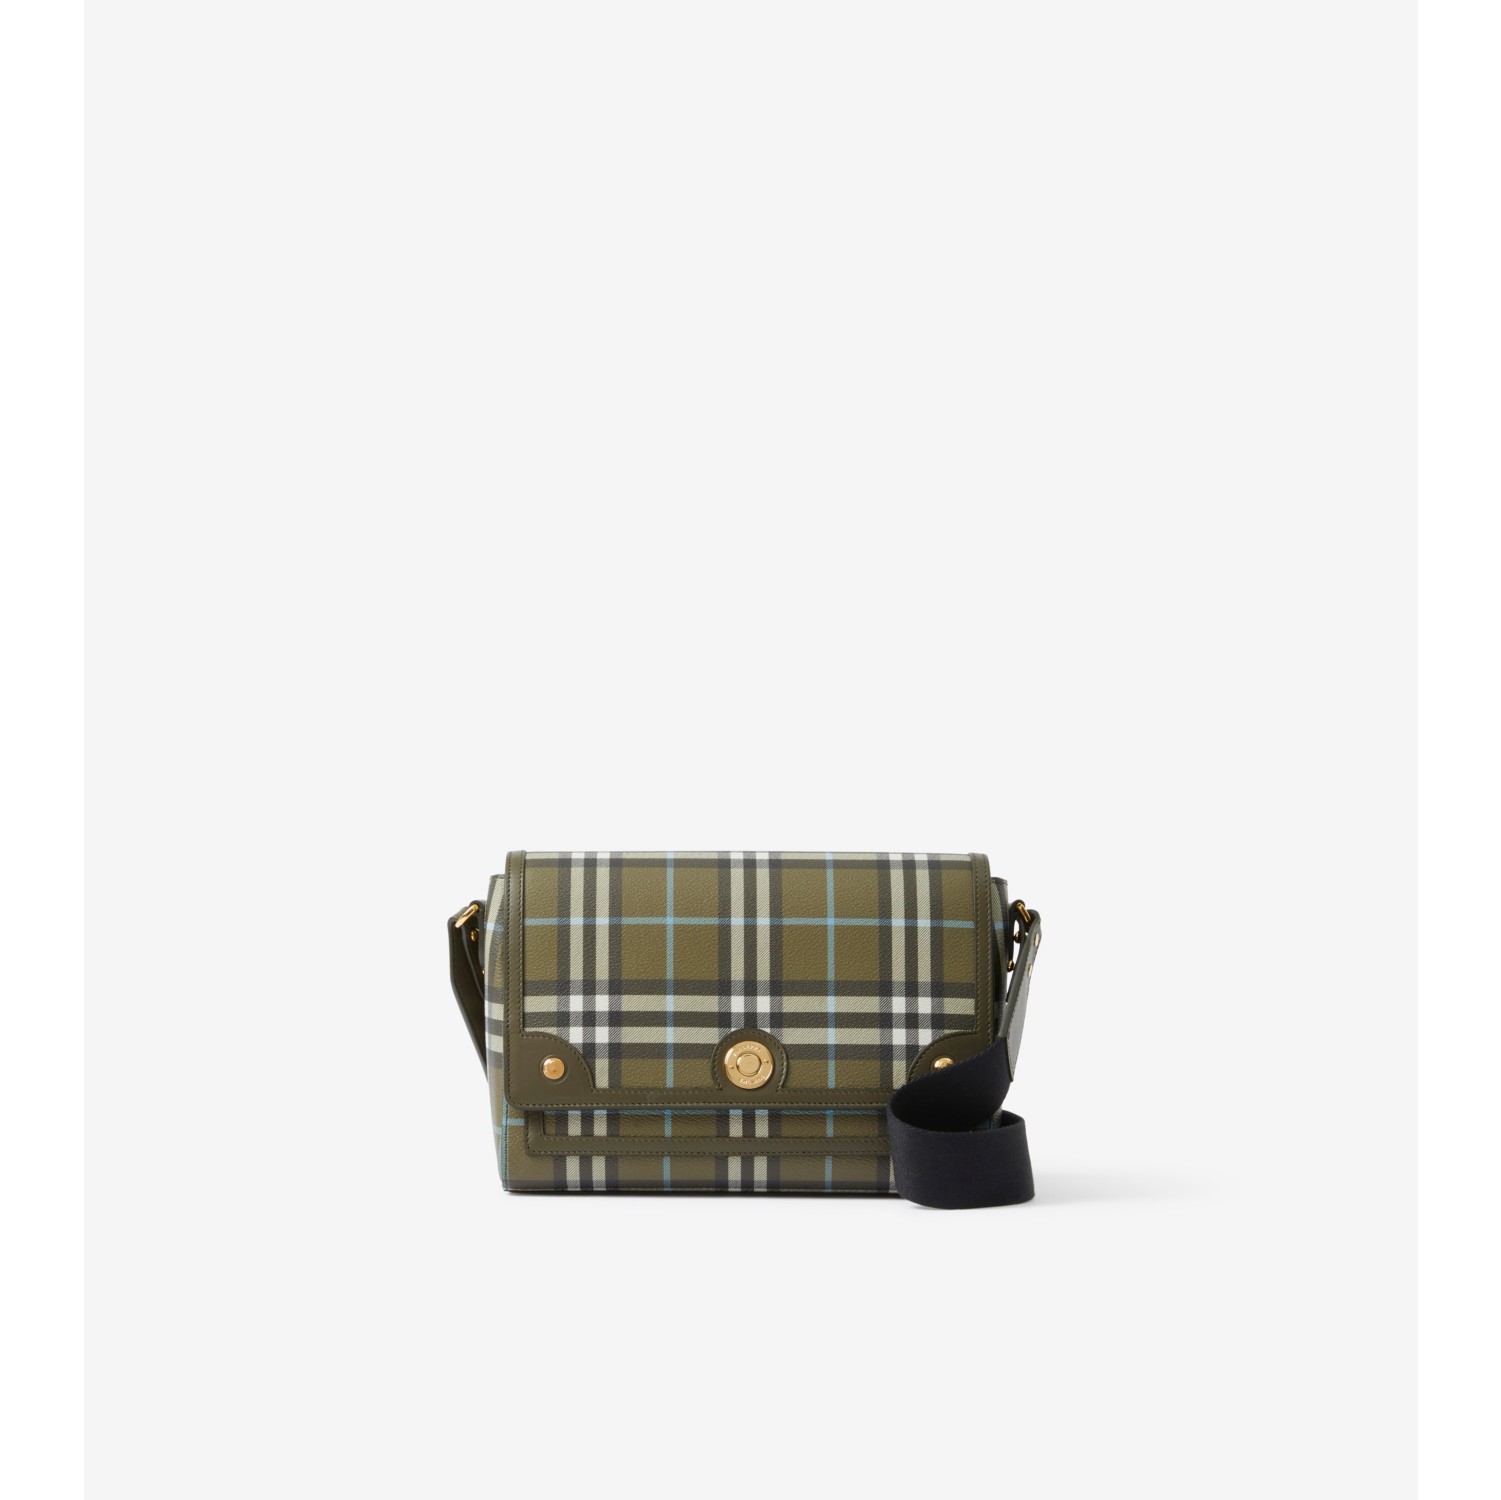 Note Bag in Olive Green - Women